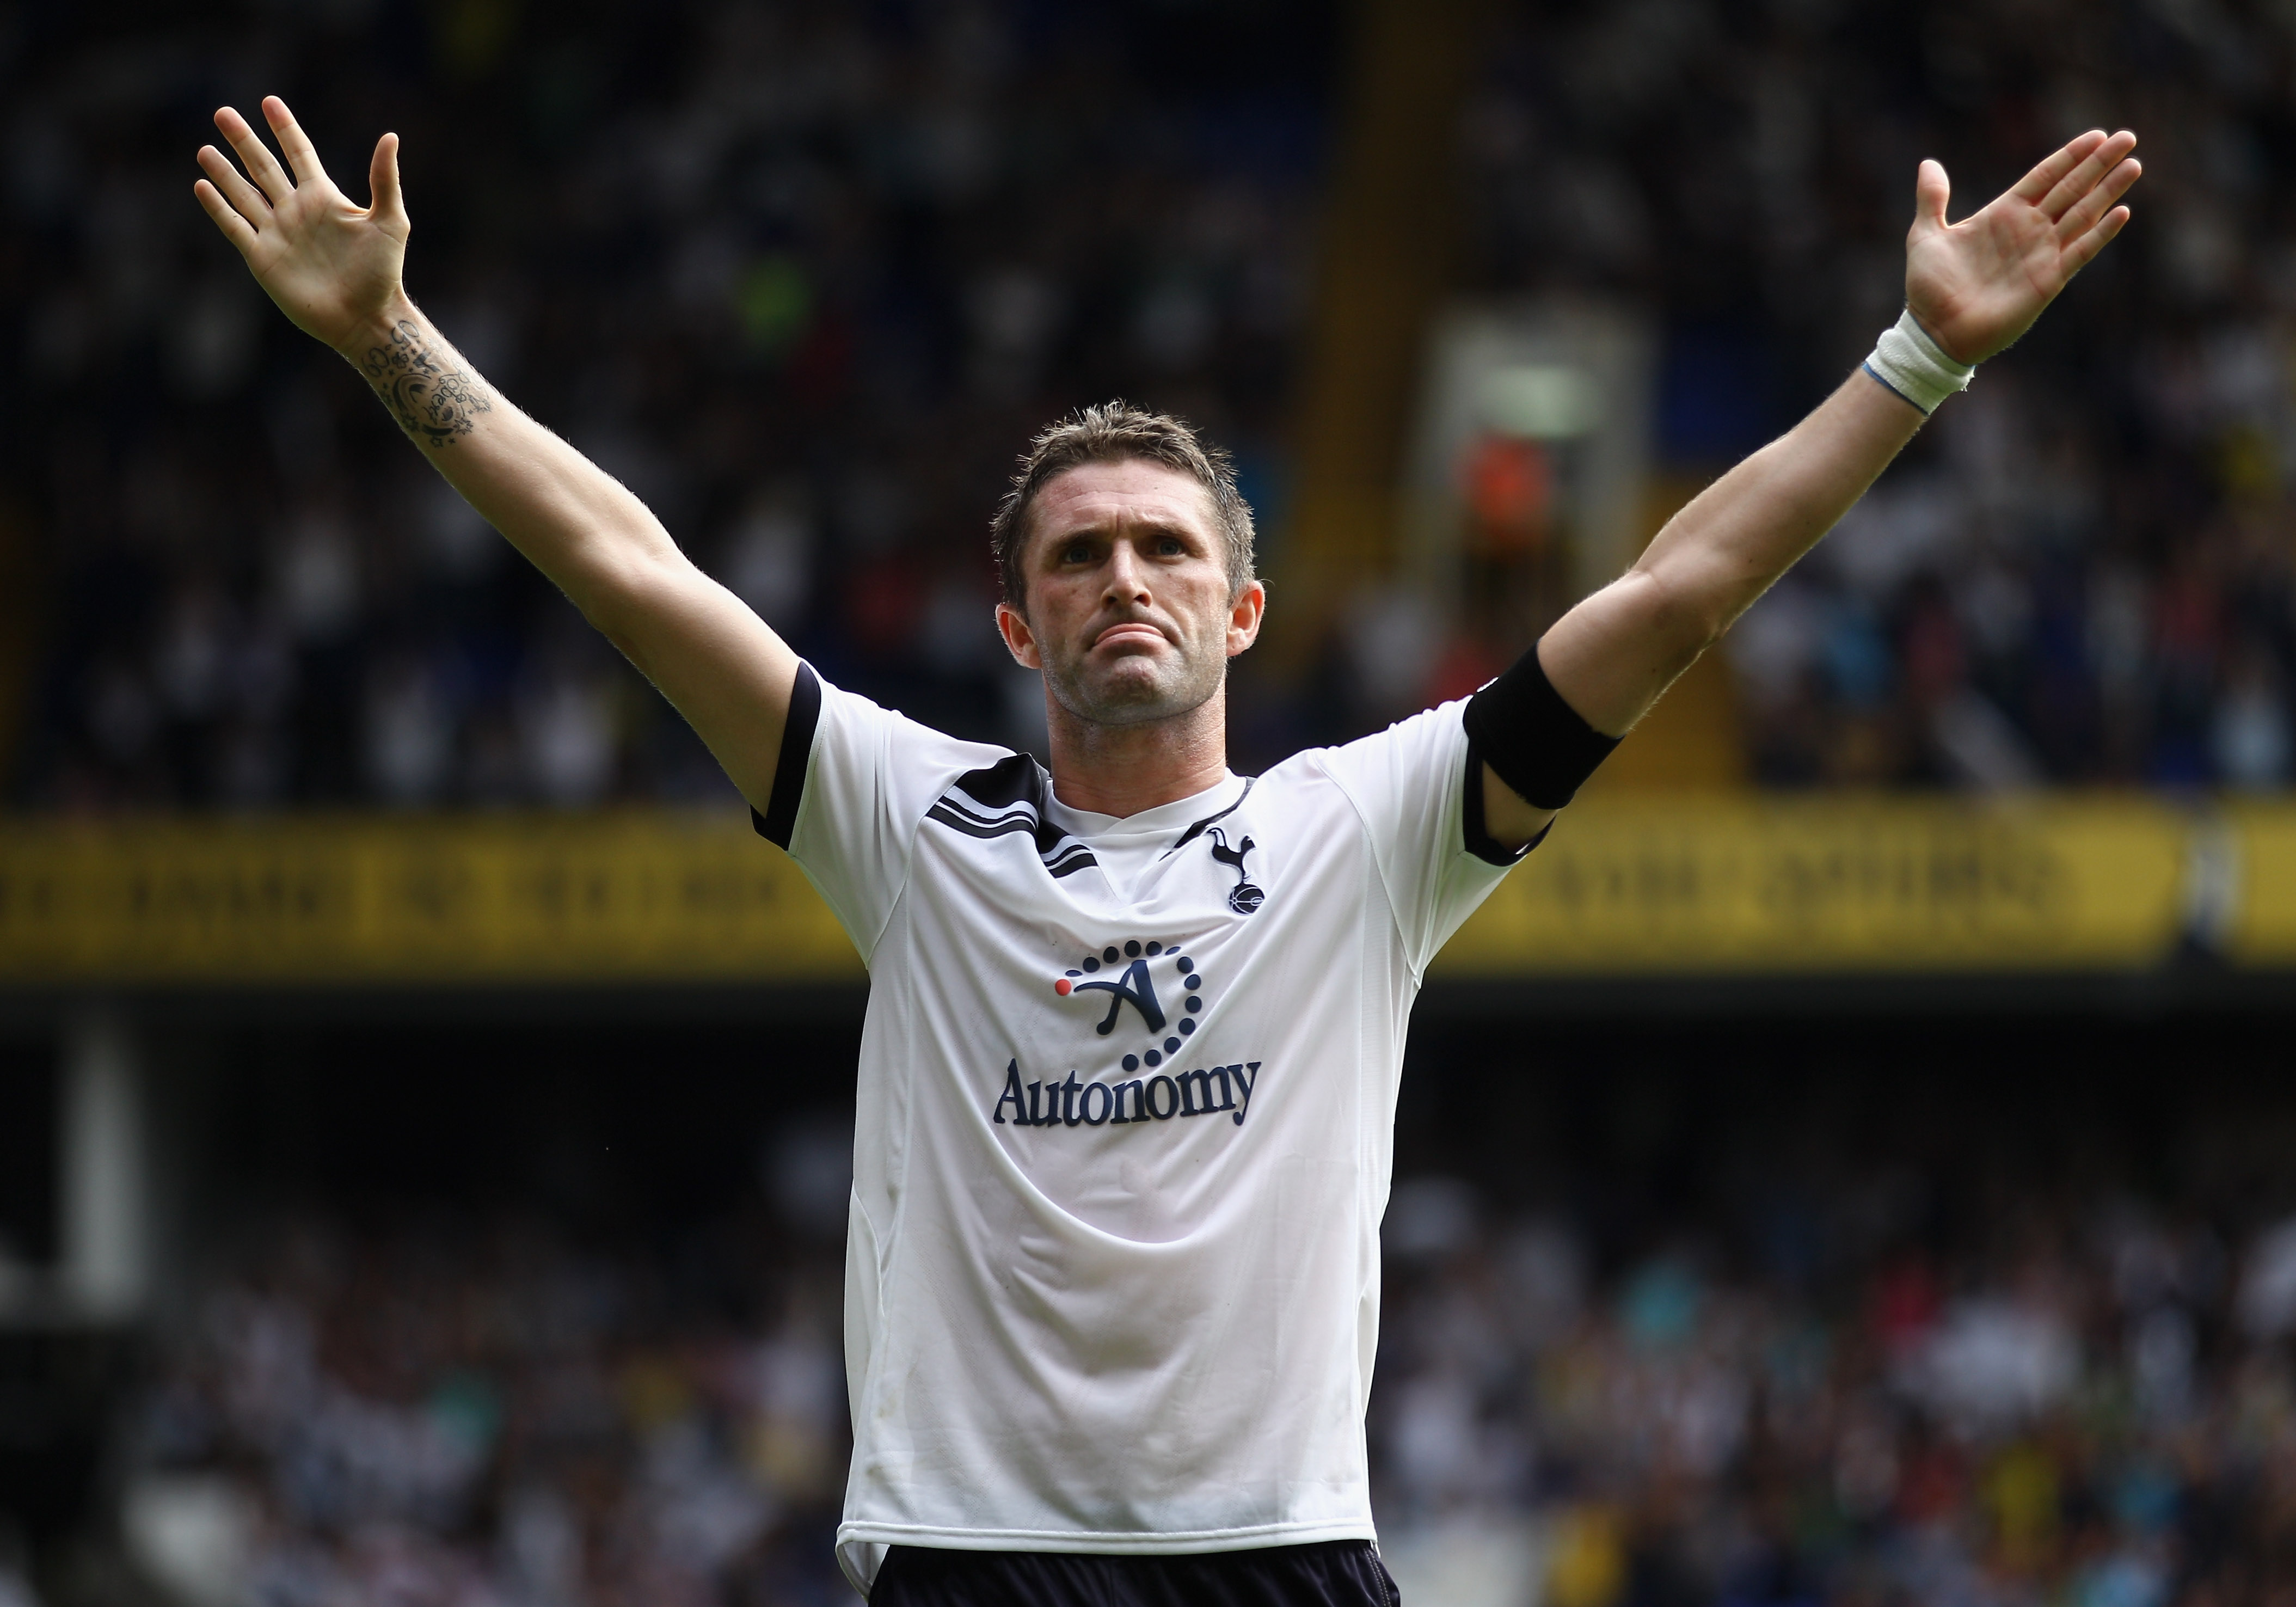 LONDON, ENGLAND - AUGUST 07:  Robbie Keane of Tottenham Hotspur celebrates scoring his second and Tottenham's third goal during the pre-season friendly match between Tottenham Hotspur and Fiorentina at White Hart Lane on August 7, 2010 in London, England.